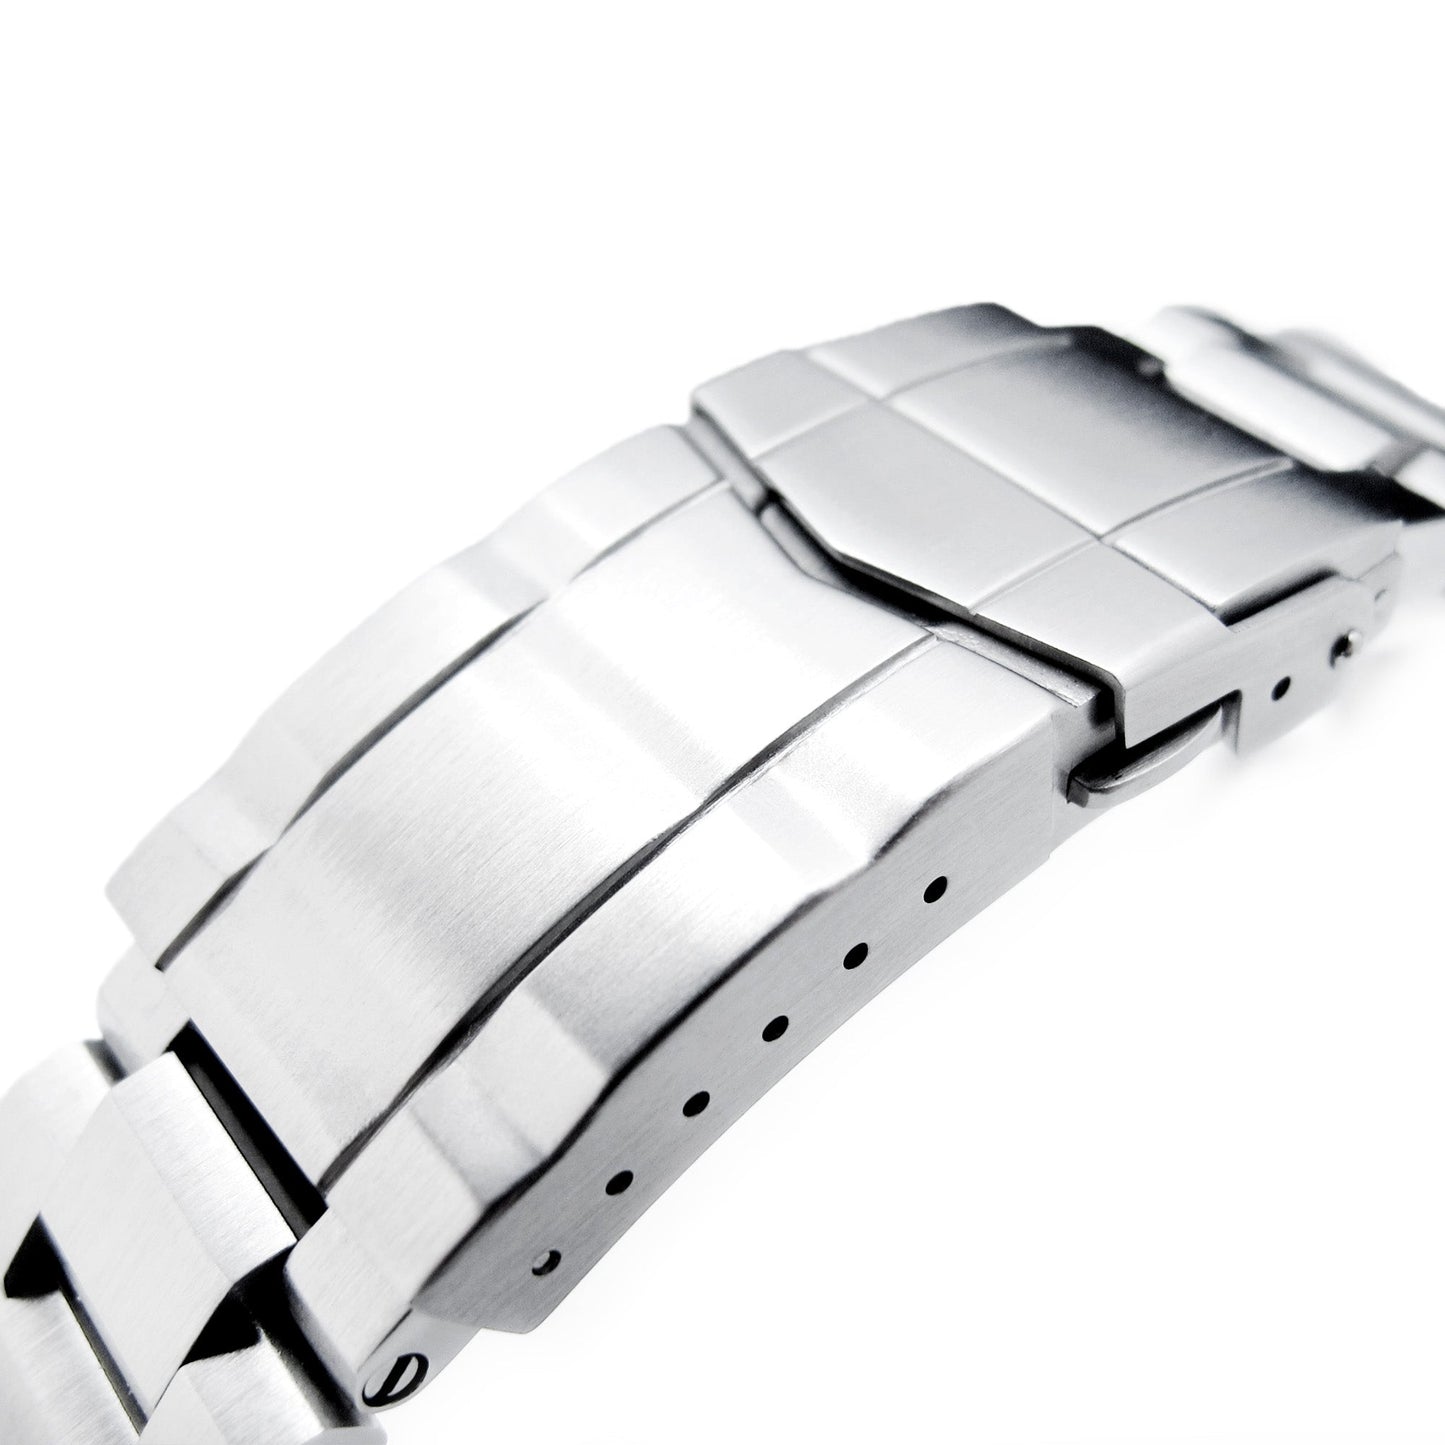 22mm Hexad Watch Band for Seiko King Samurai SRPE33, 316L Stainless Steel Brushed SUB Clasp